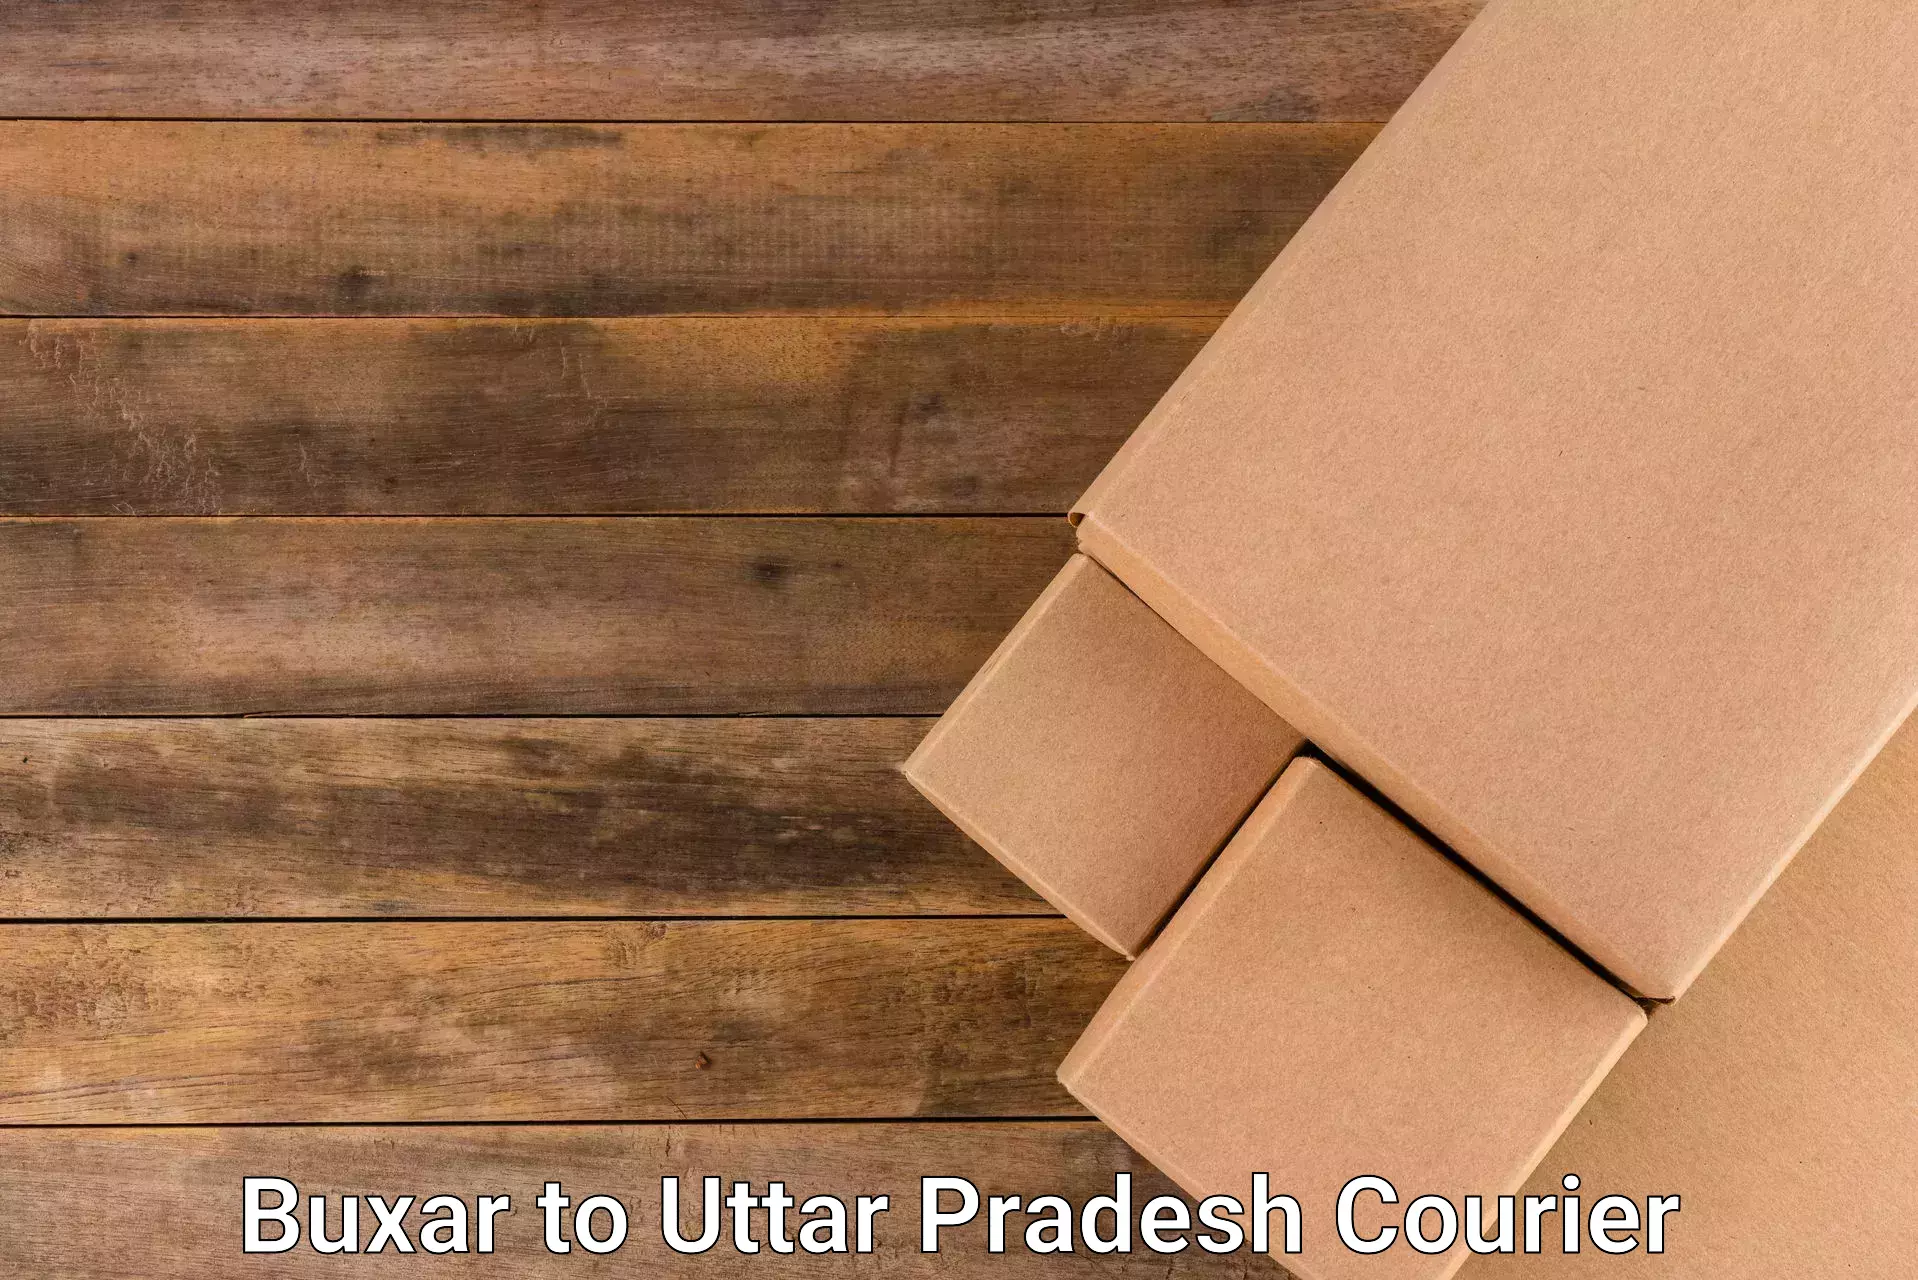 Fast parcel dispatch Buxar to Aligarh